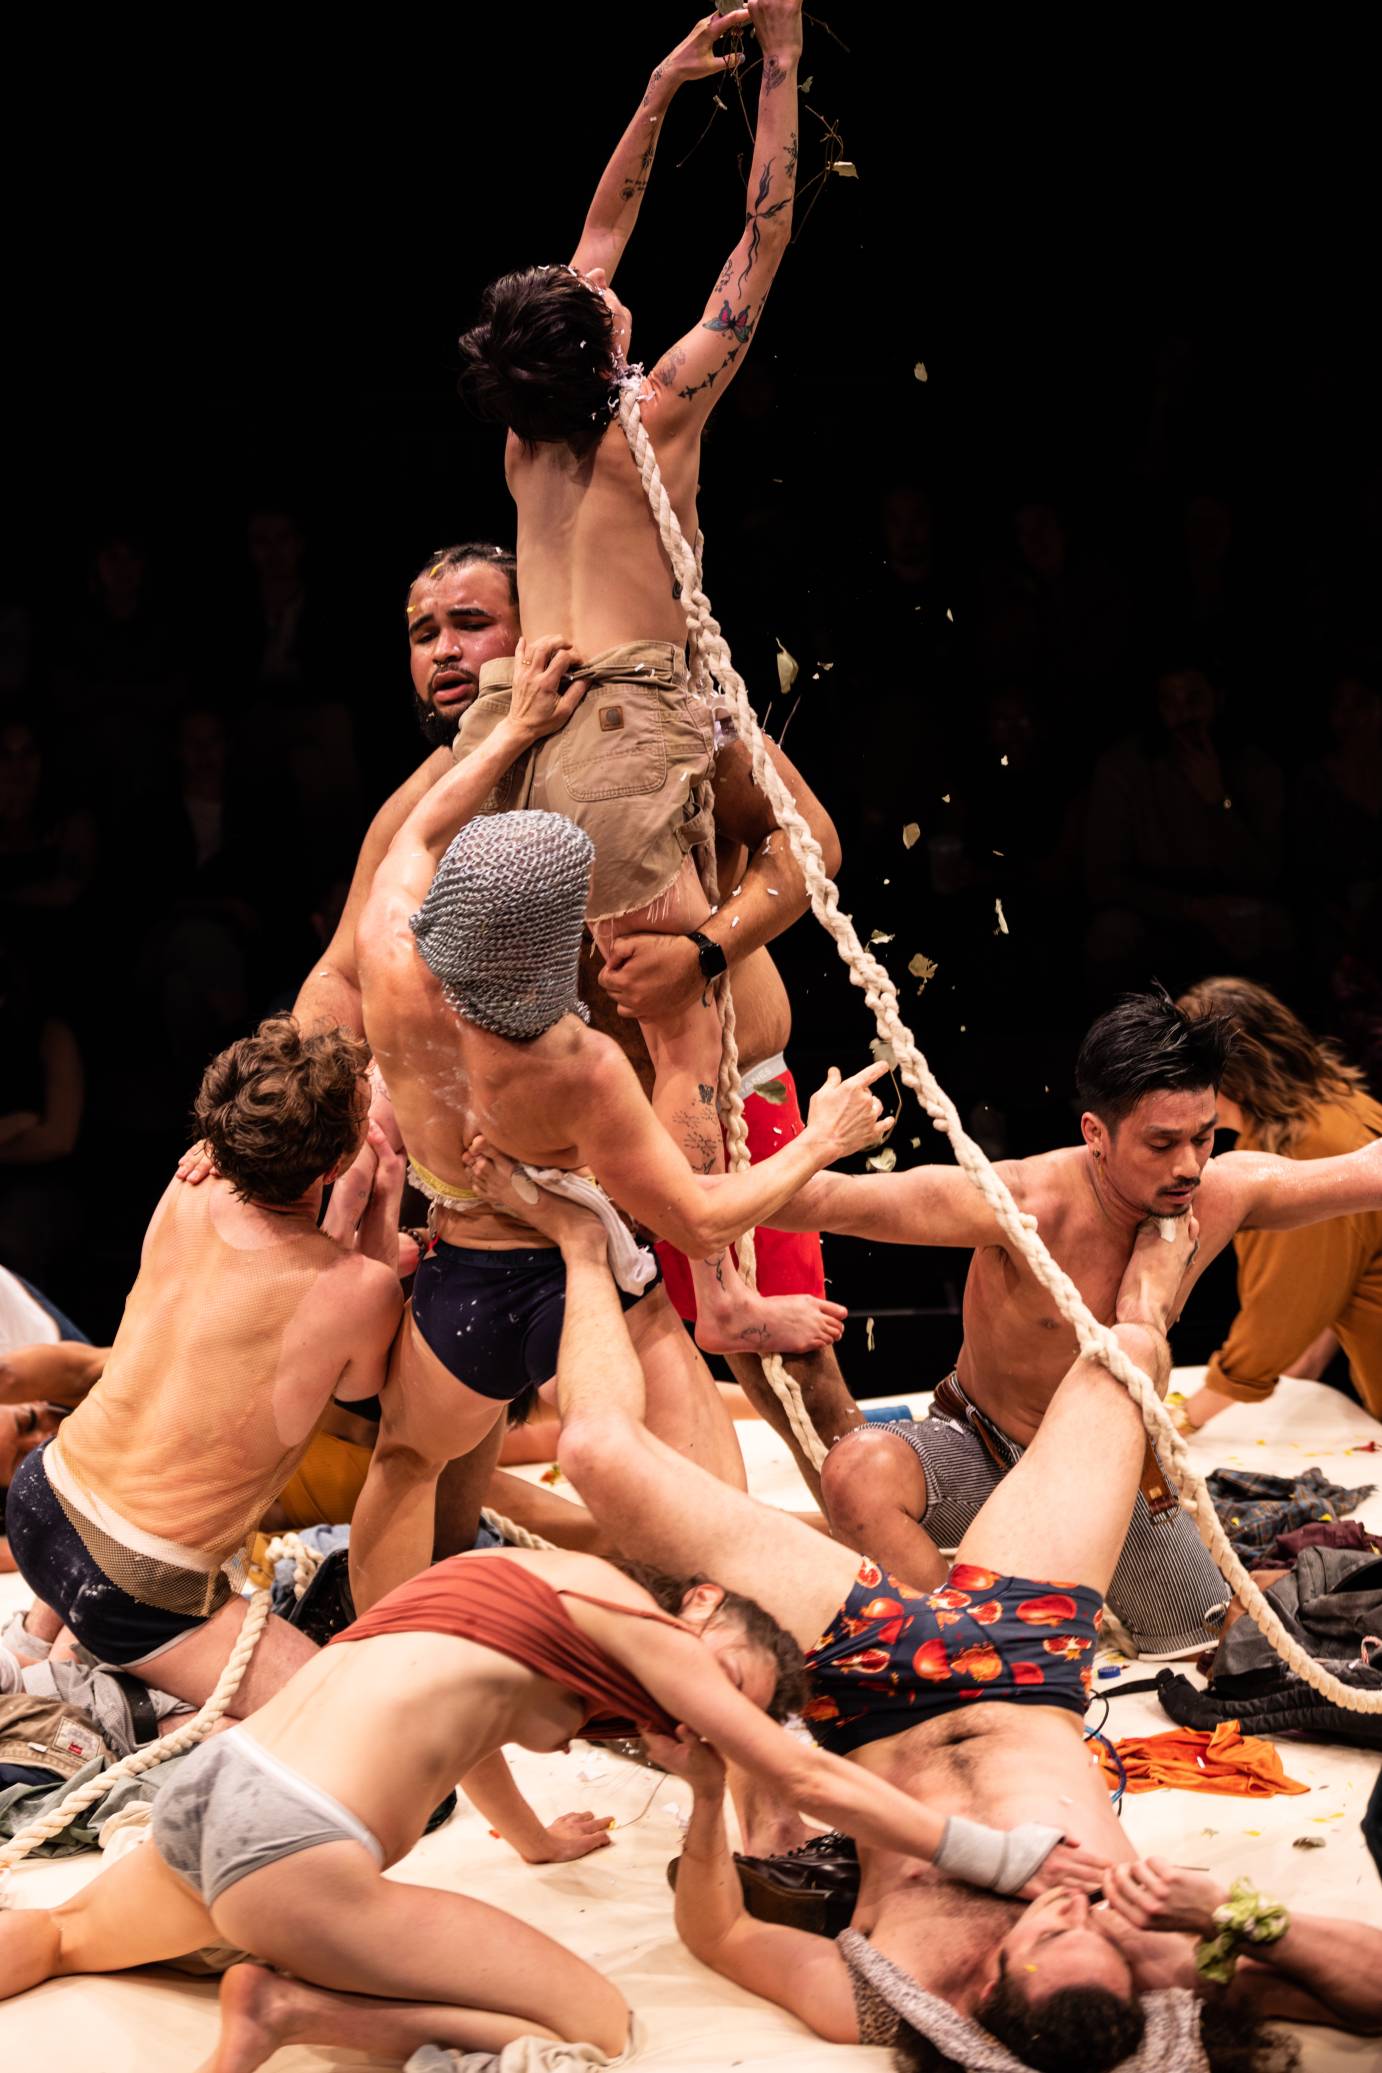 A white woman with arms stretched to the ceiling crumbles leaves as she is lifted by performers balanced on a white spongy platform